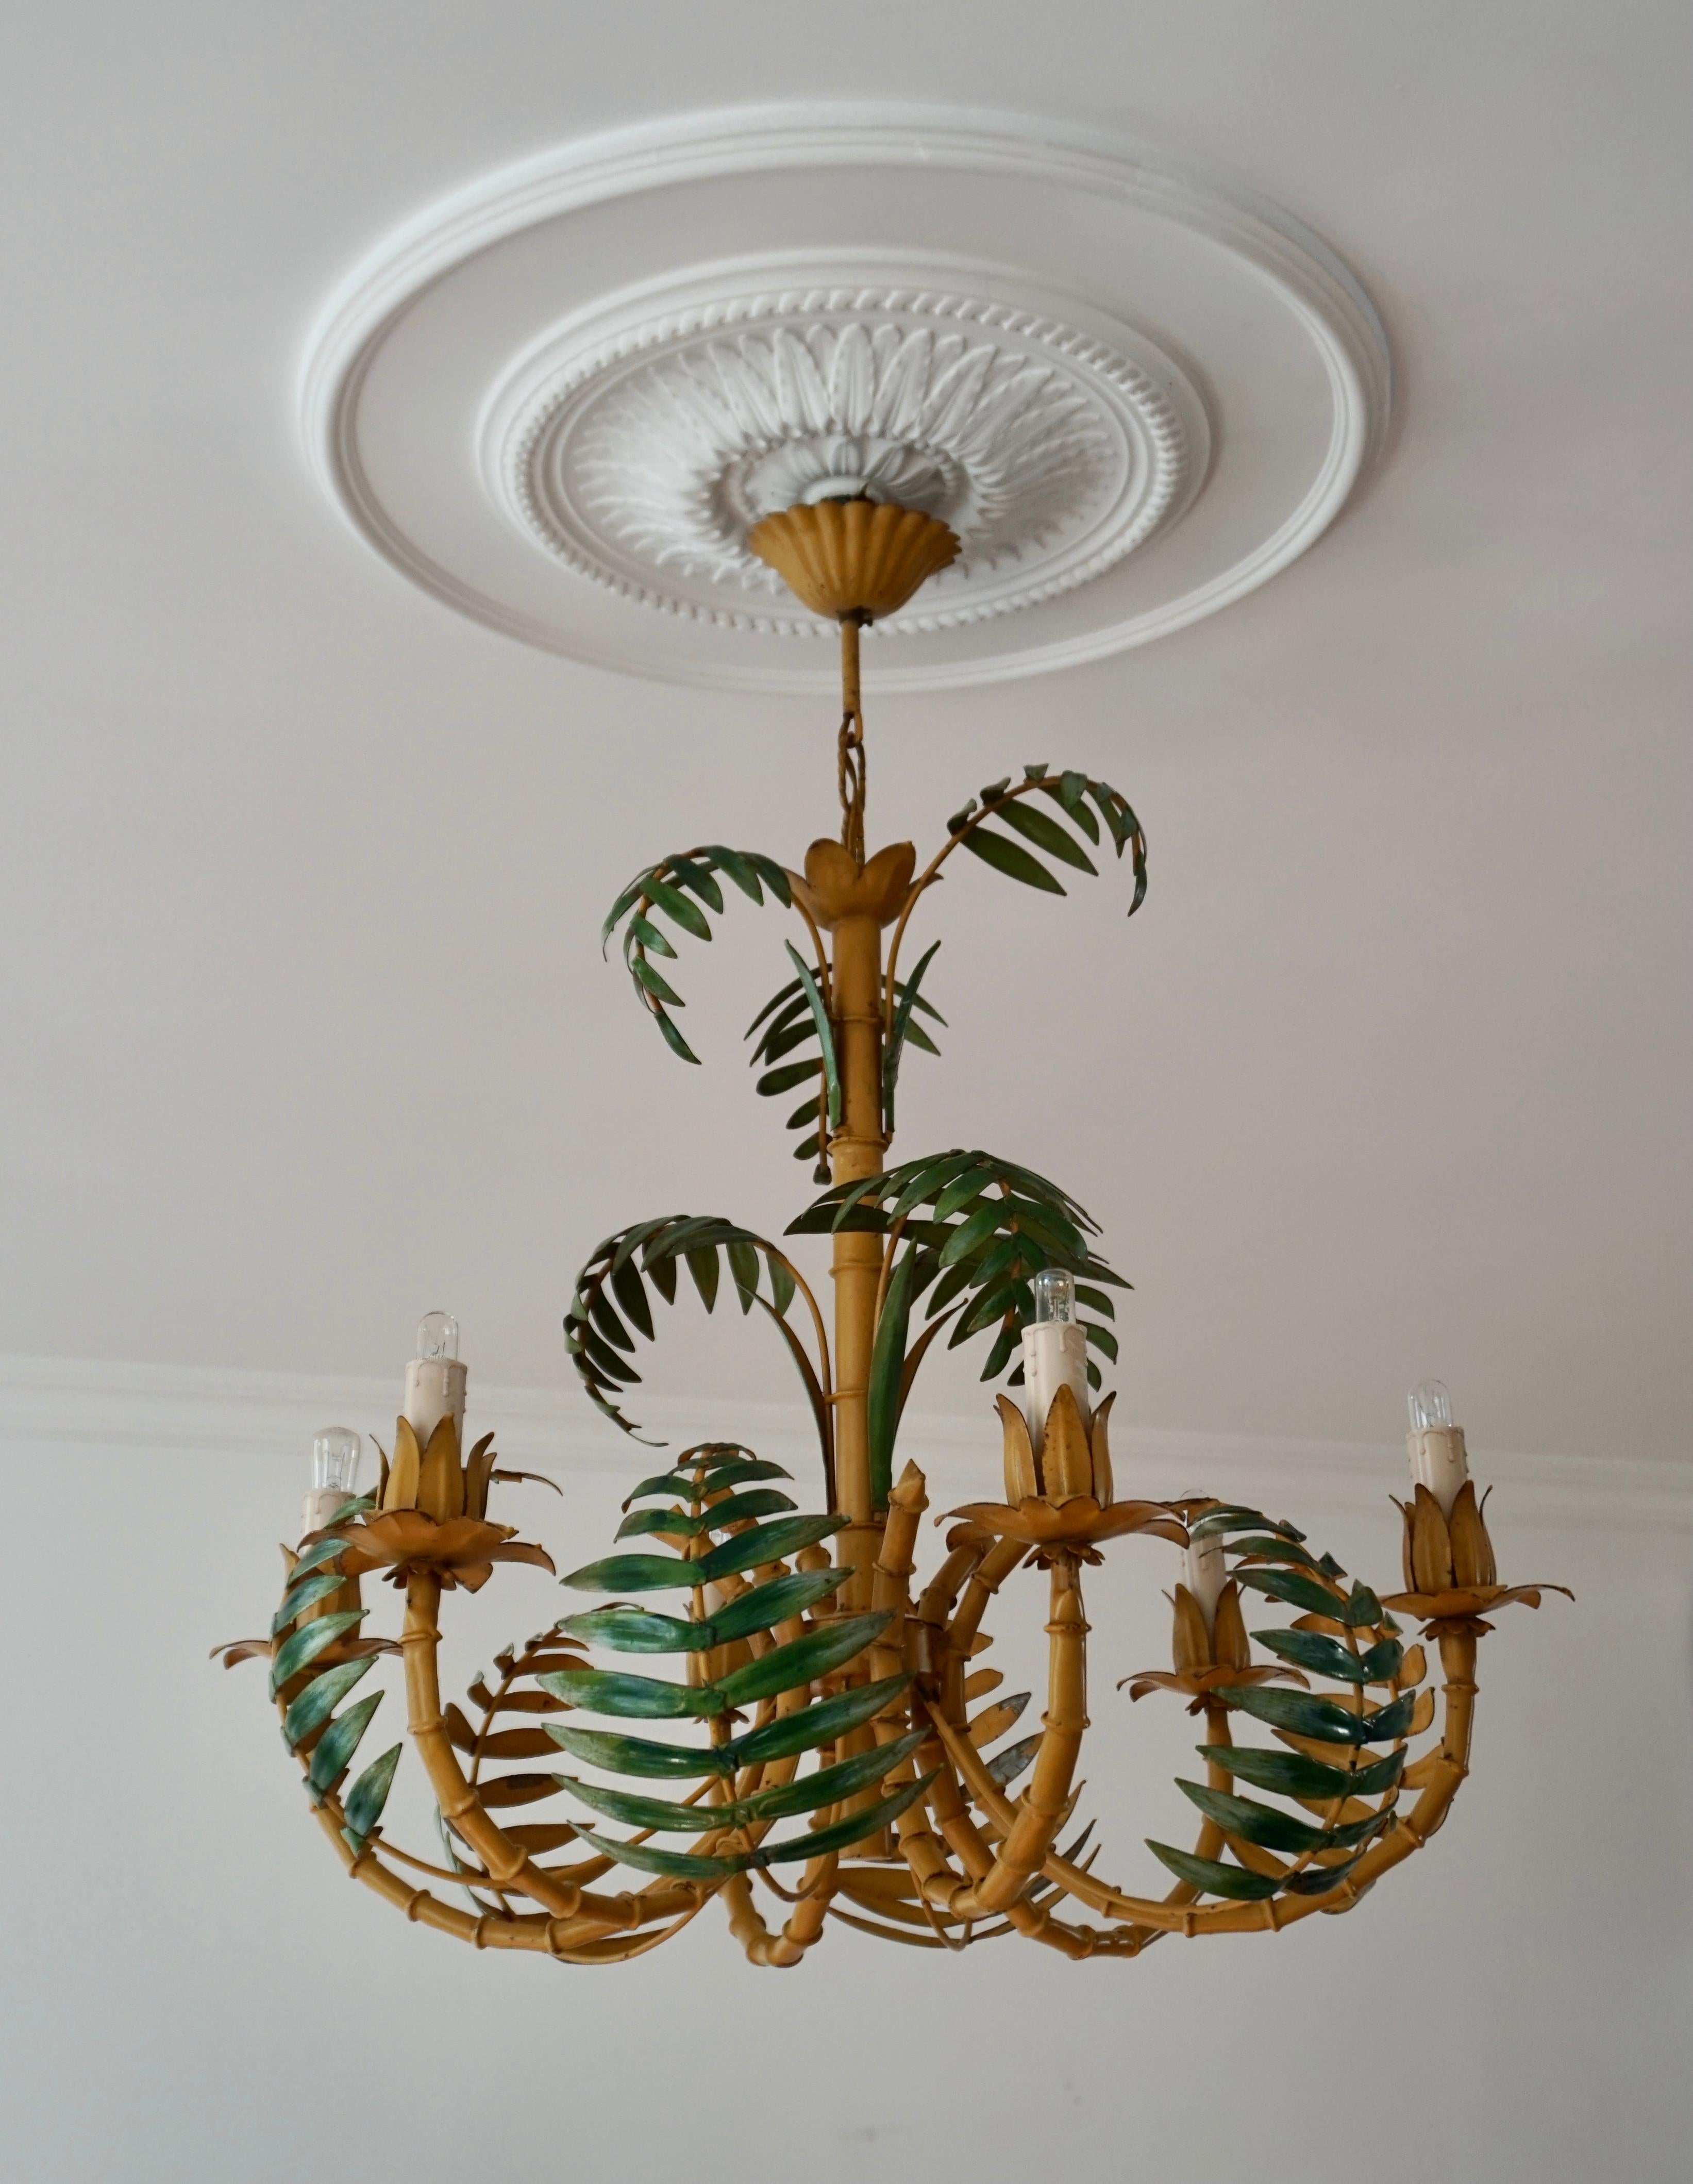 Painted Stylish Hollywood Regency Tole and Faux Bamboo Chandelier Pendant